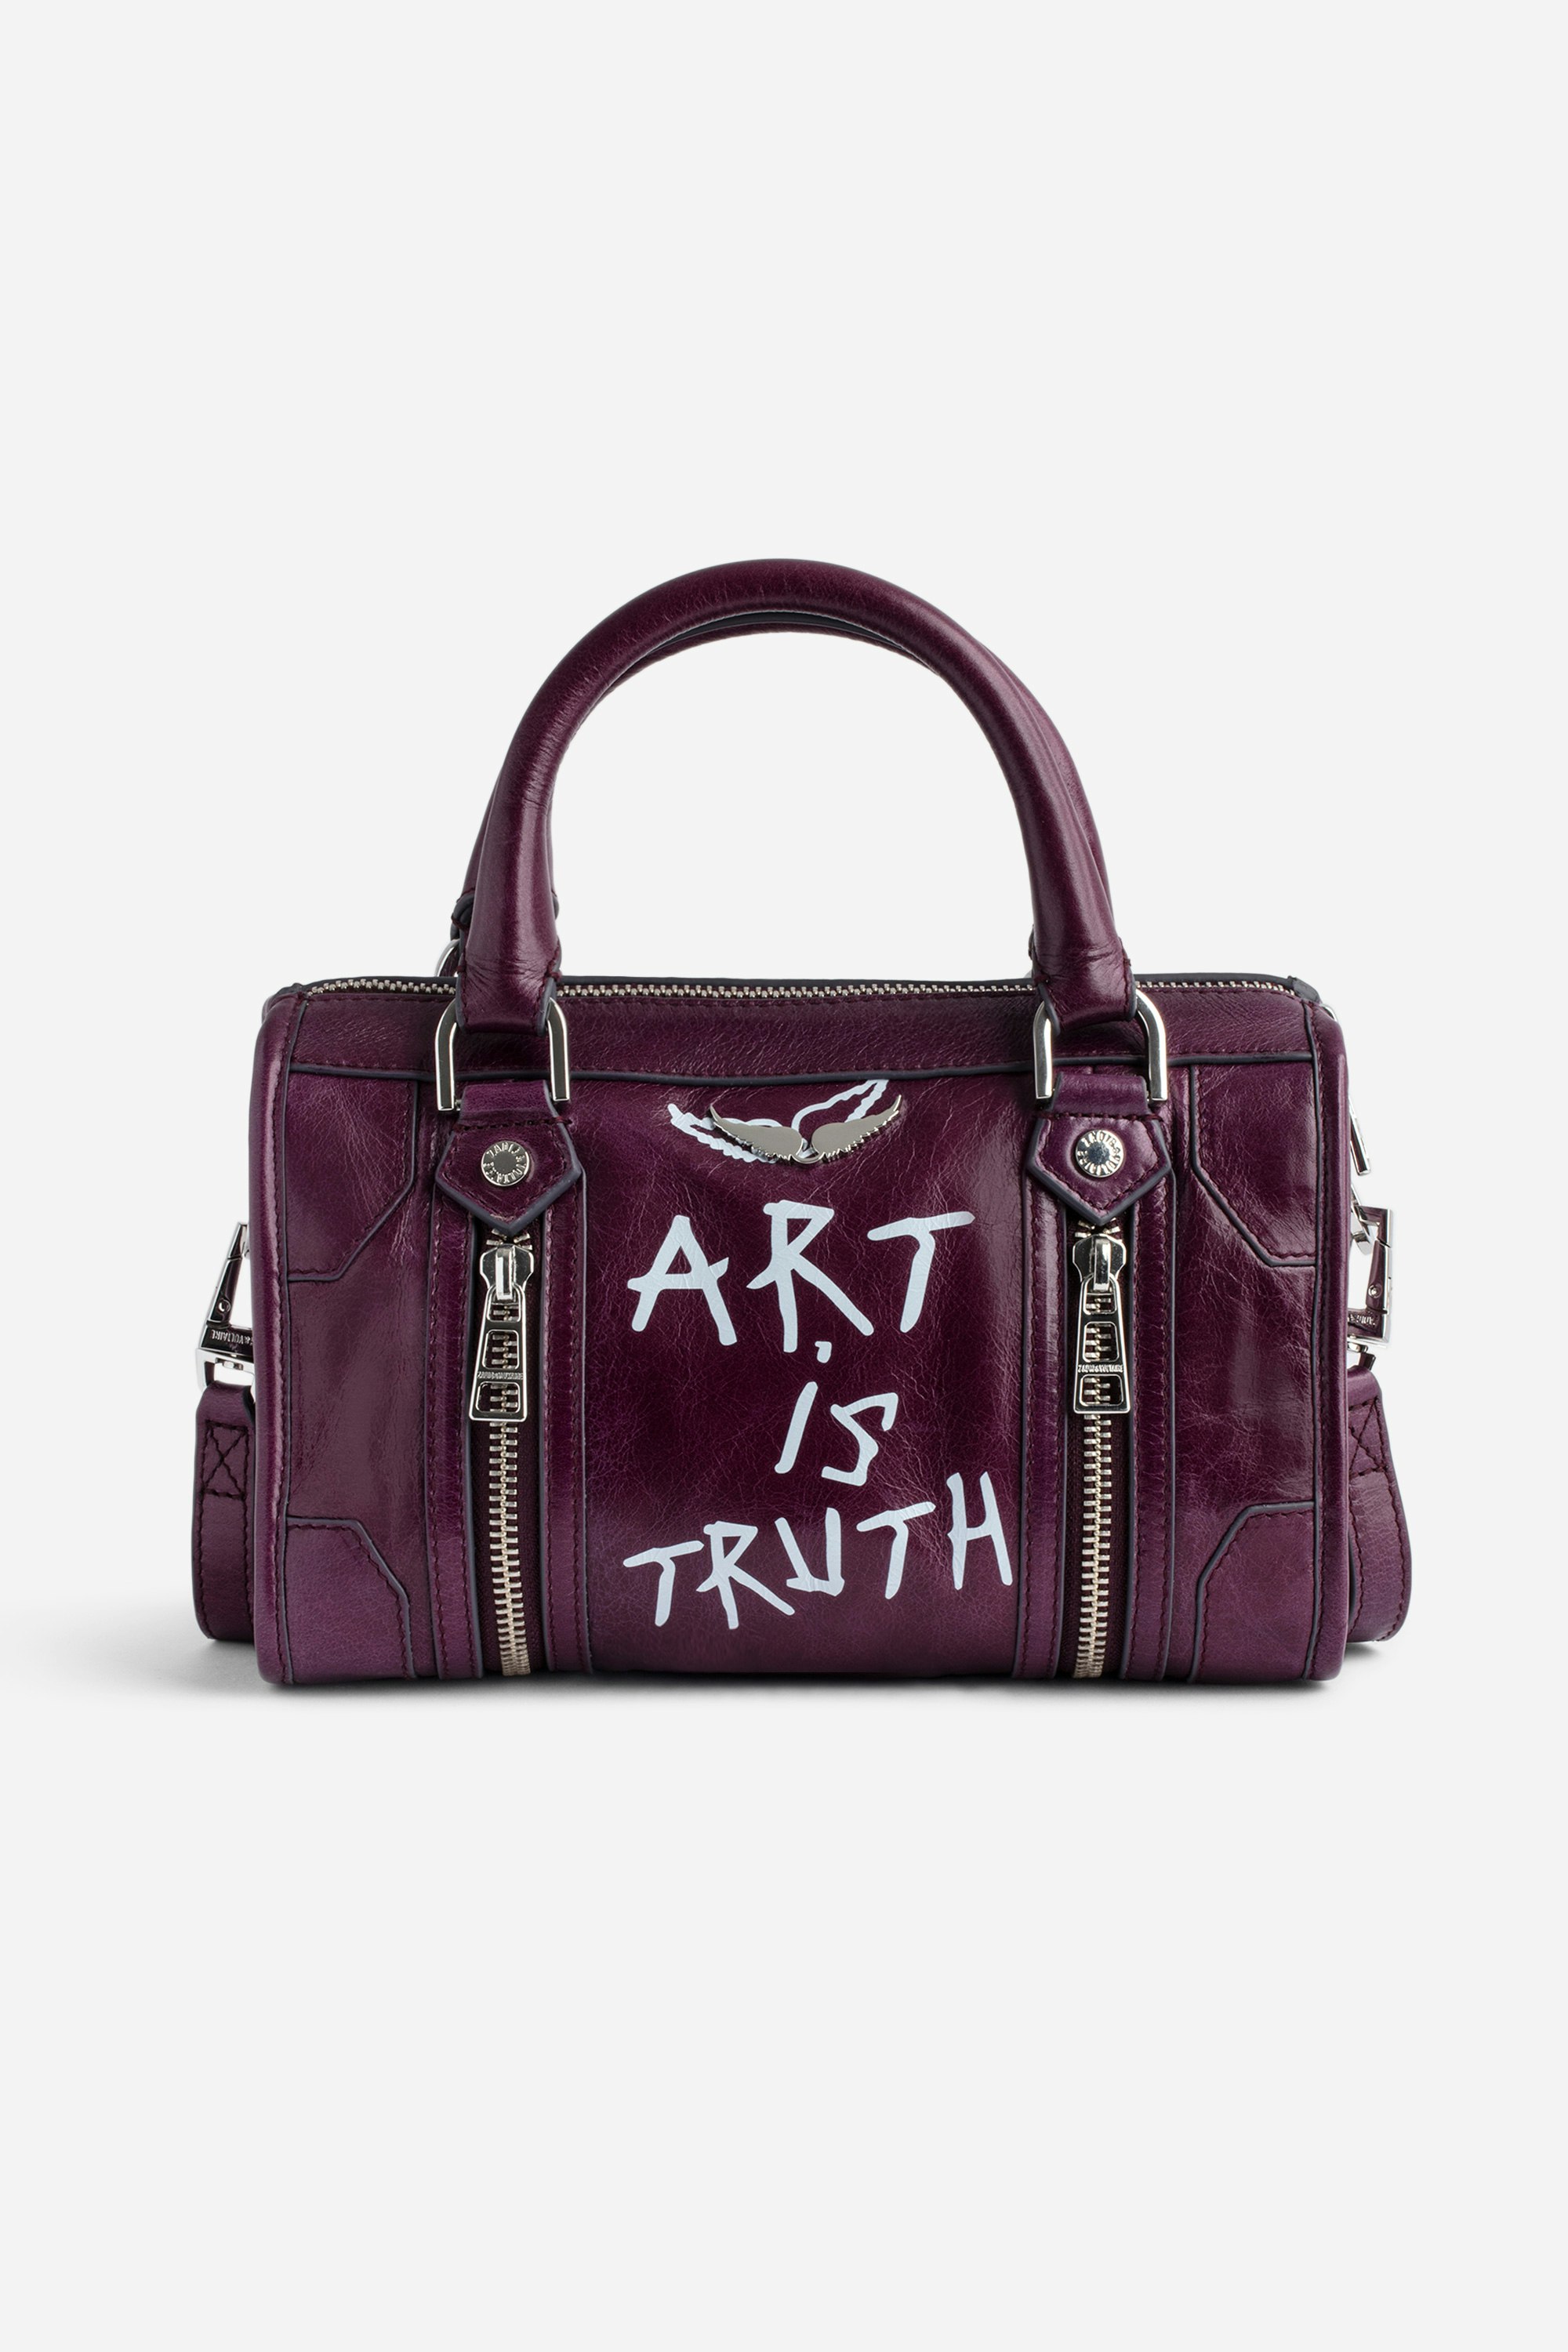 Sunny XS #2 Tag Bag Women’s burgundy vintage-effect patent leather bag with handle and shoulder strap with wings and “Art is truth” tags.